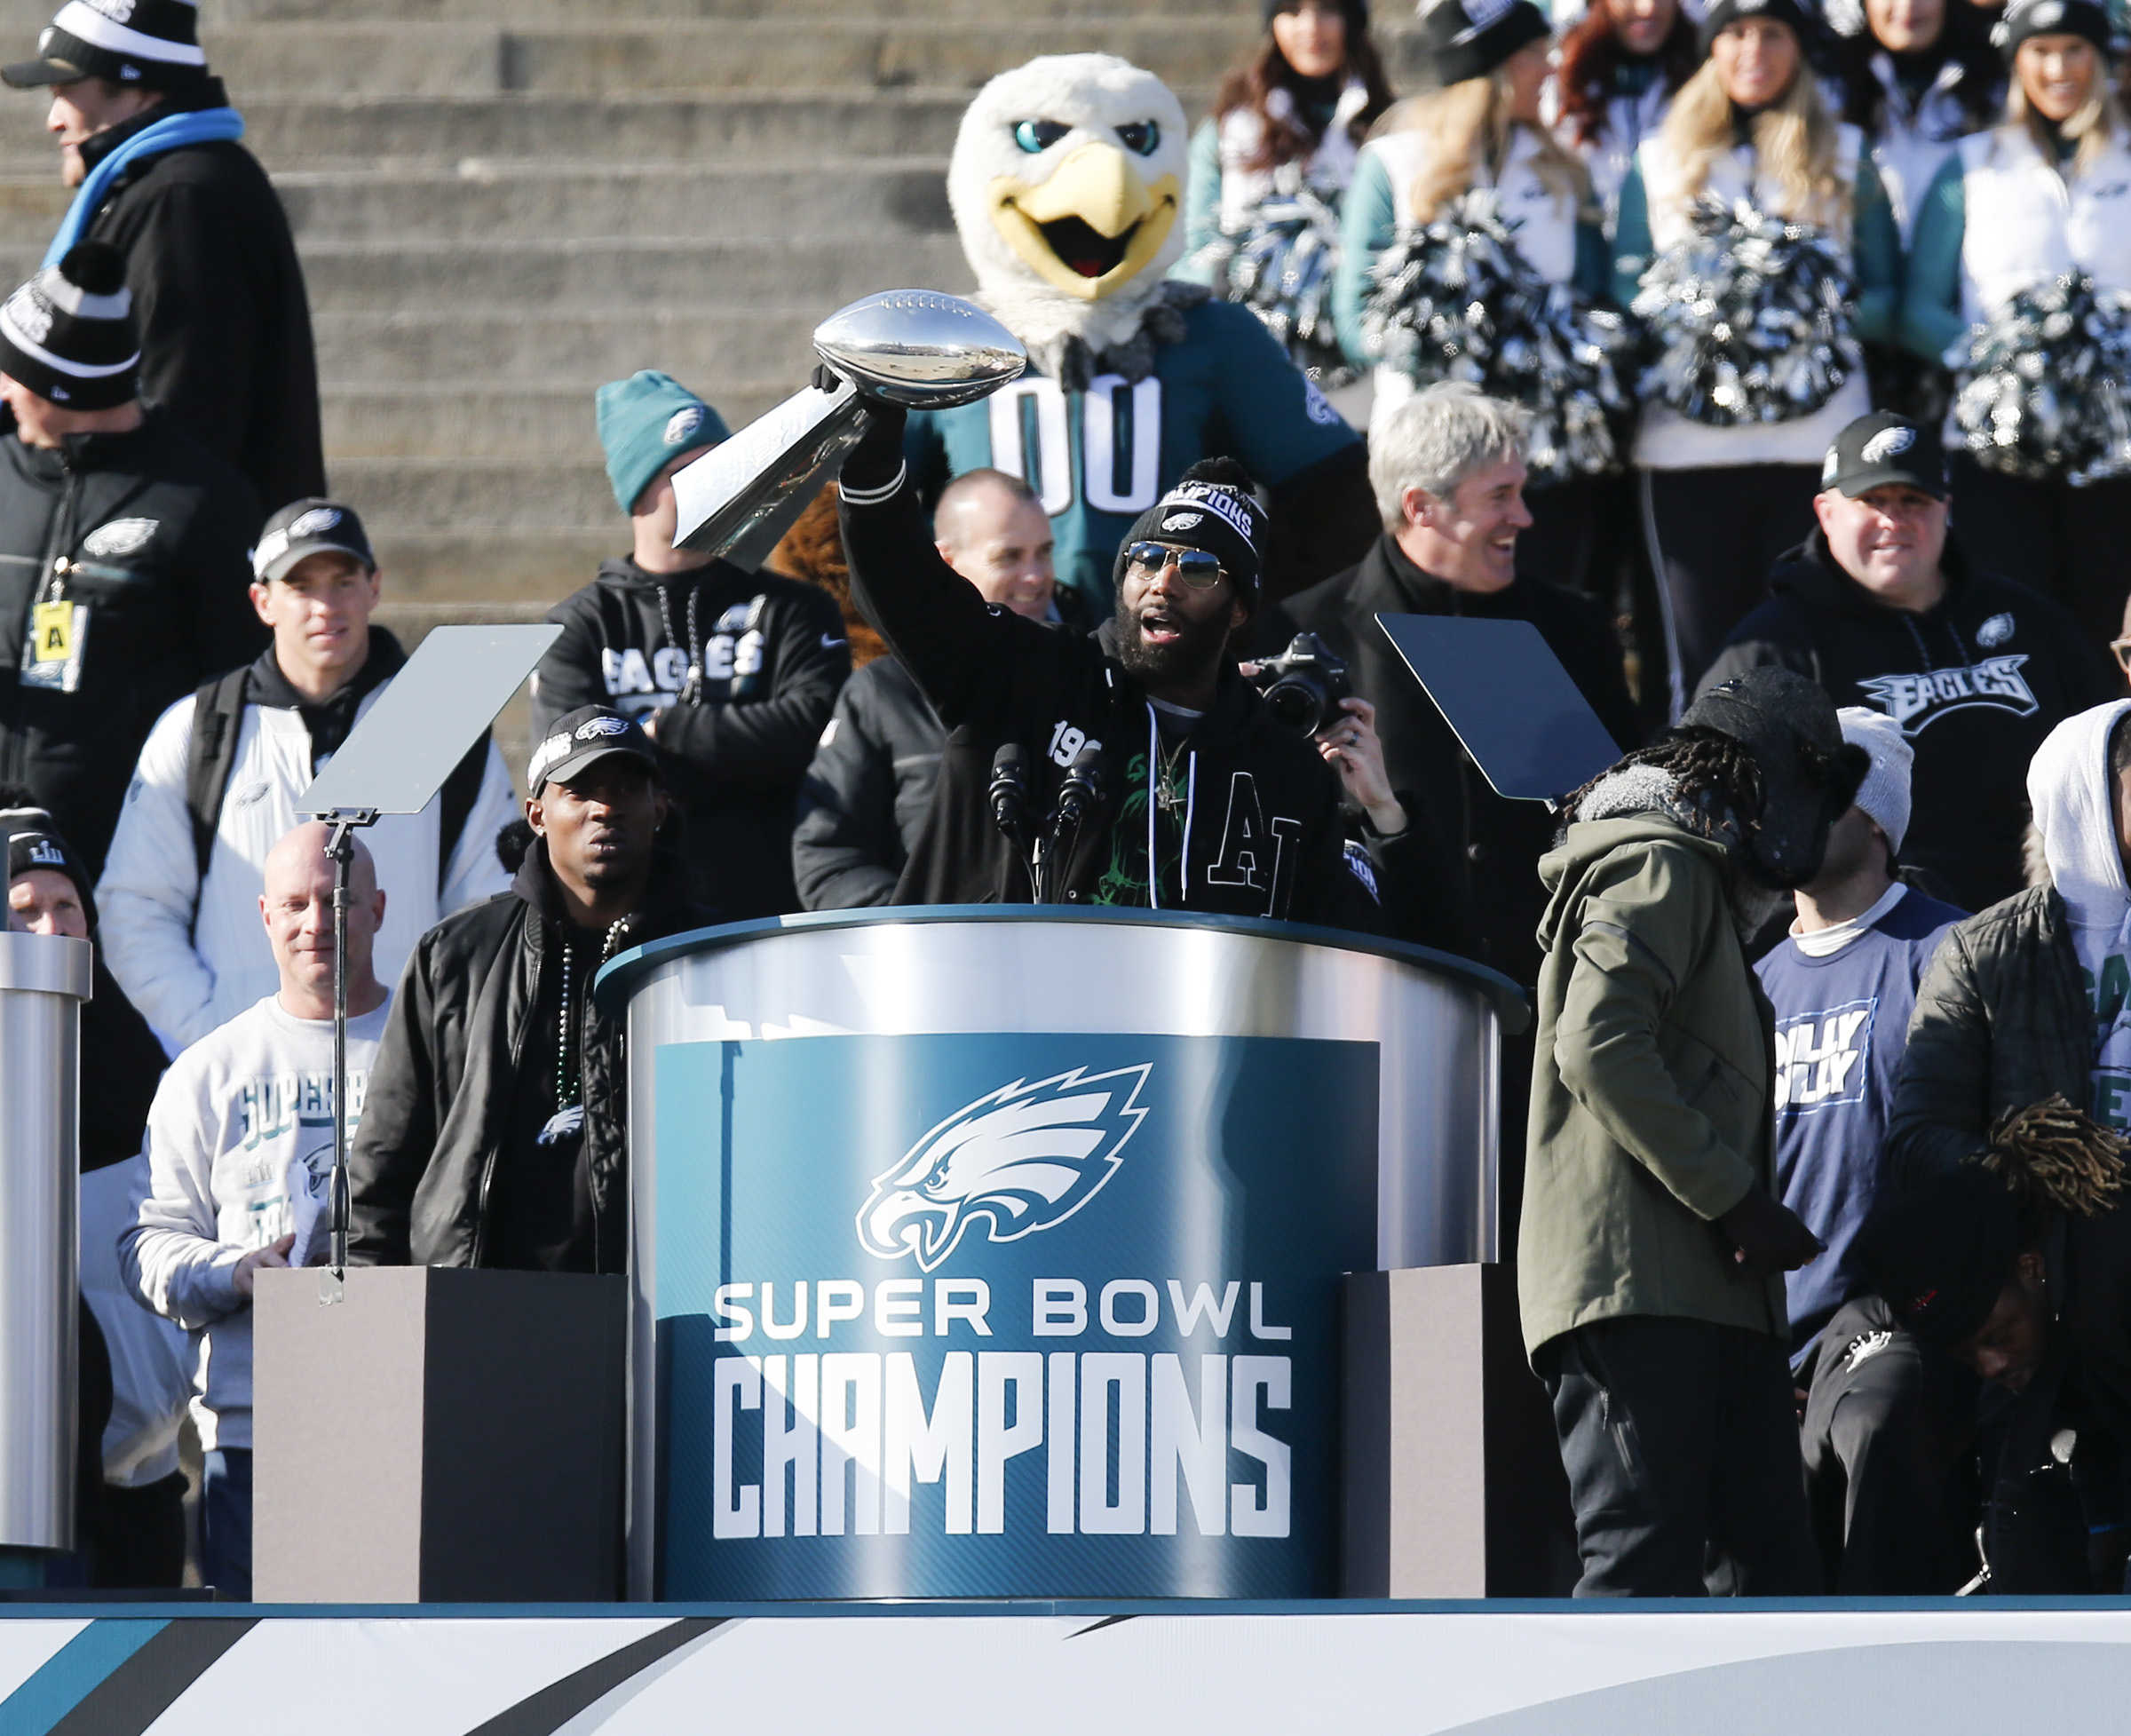 Patriots parade: Boston won't match the Eagles' celebration from last year